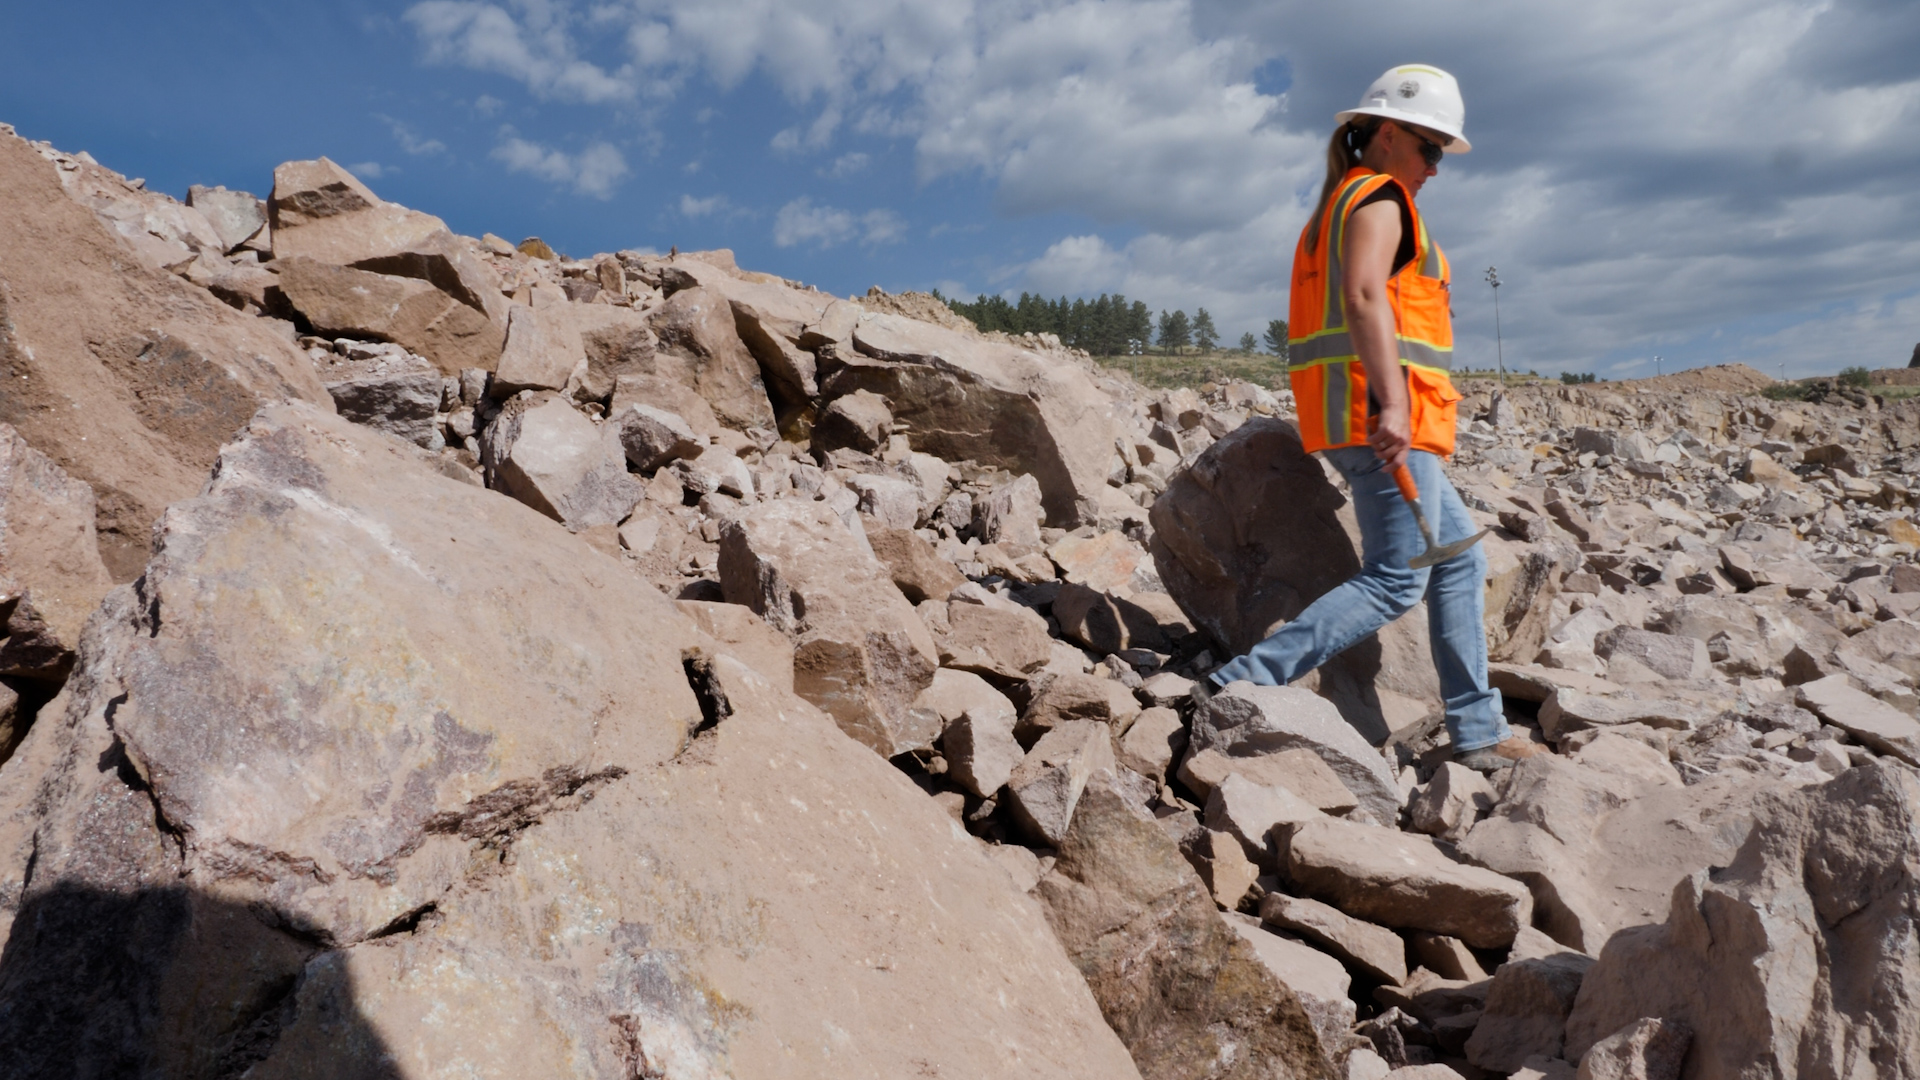 More than a geologist: A day in the life of Christina